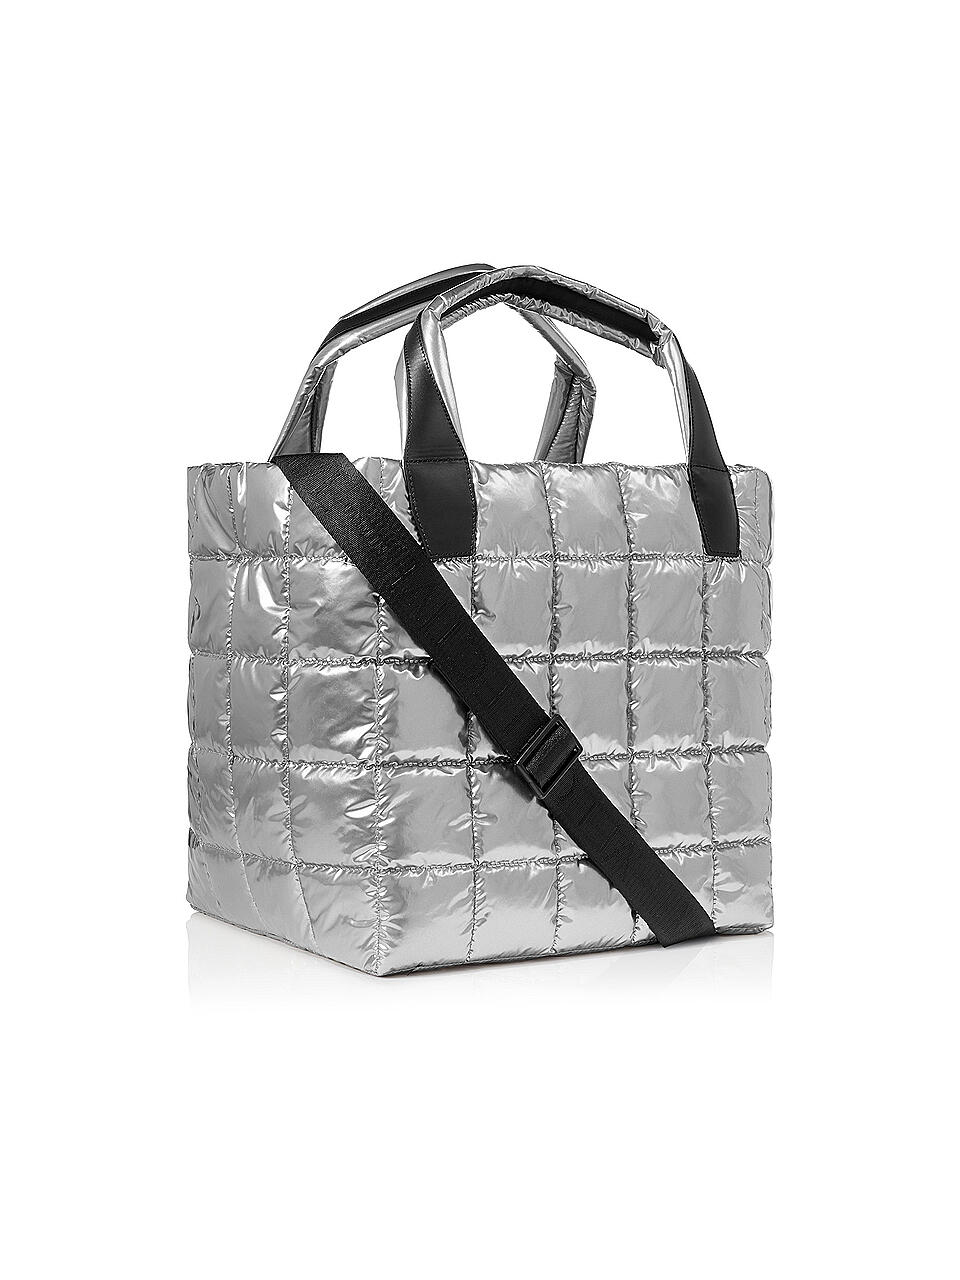 VEE COLLECTIVE | Tasche - Tote Bag PORTER M | silber